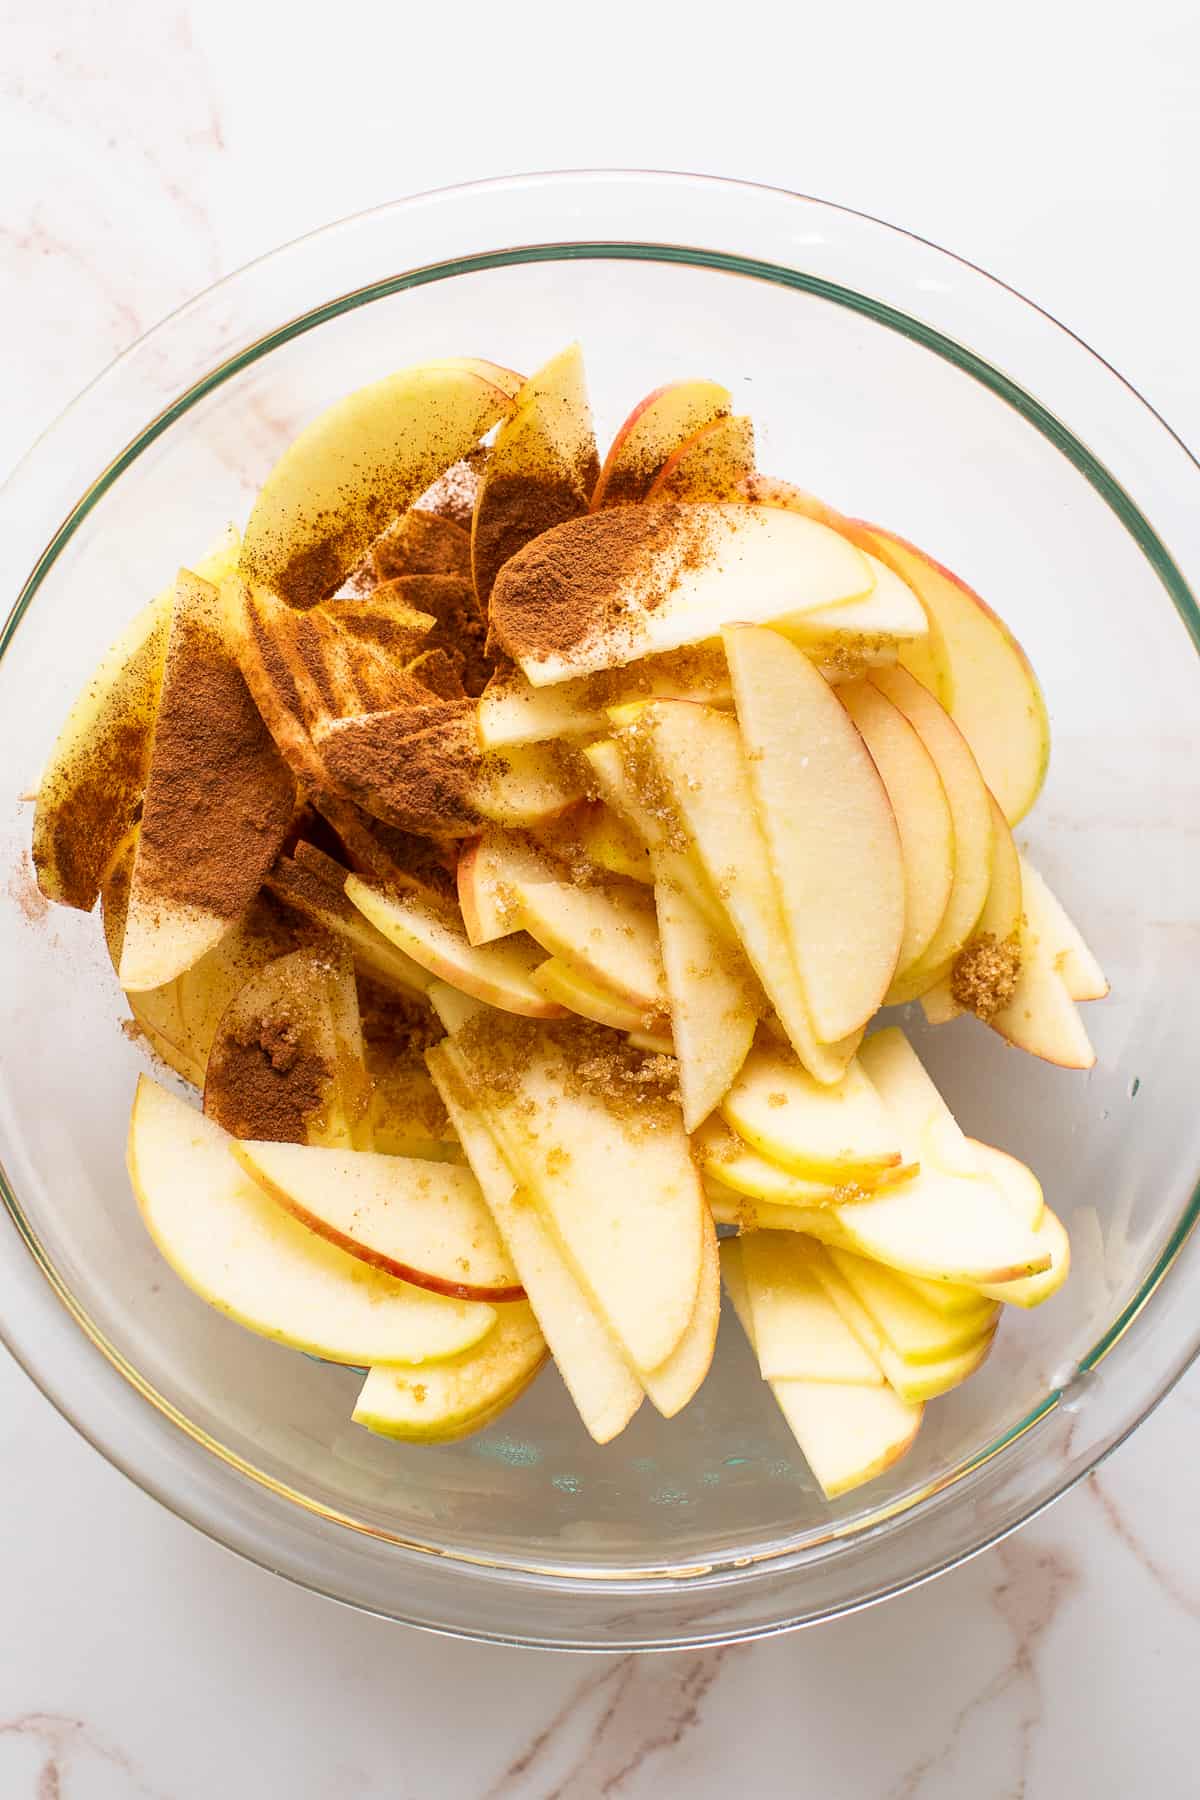 A bowl of sliced apples with cinnamon on top.